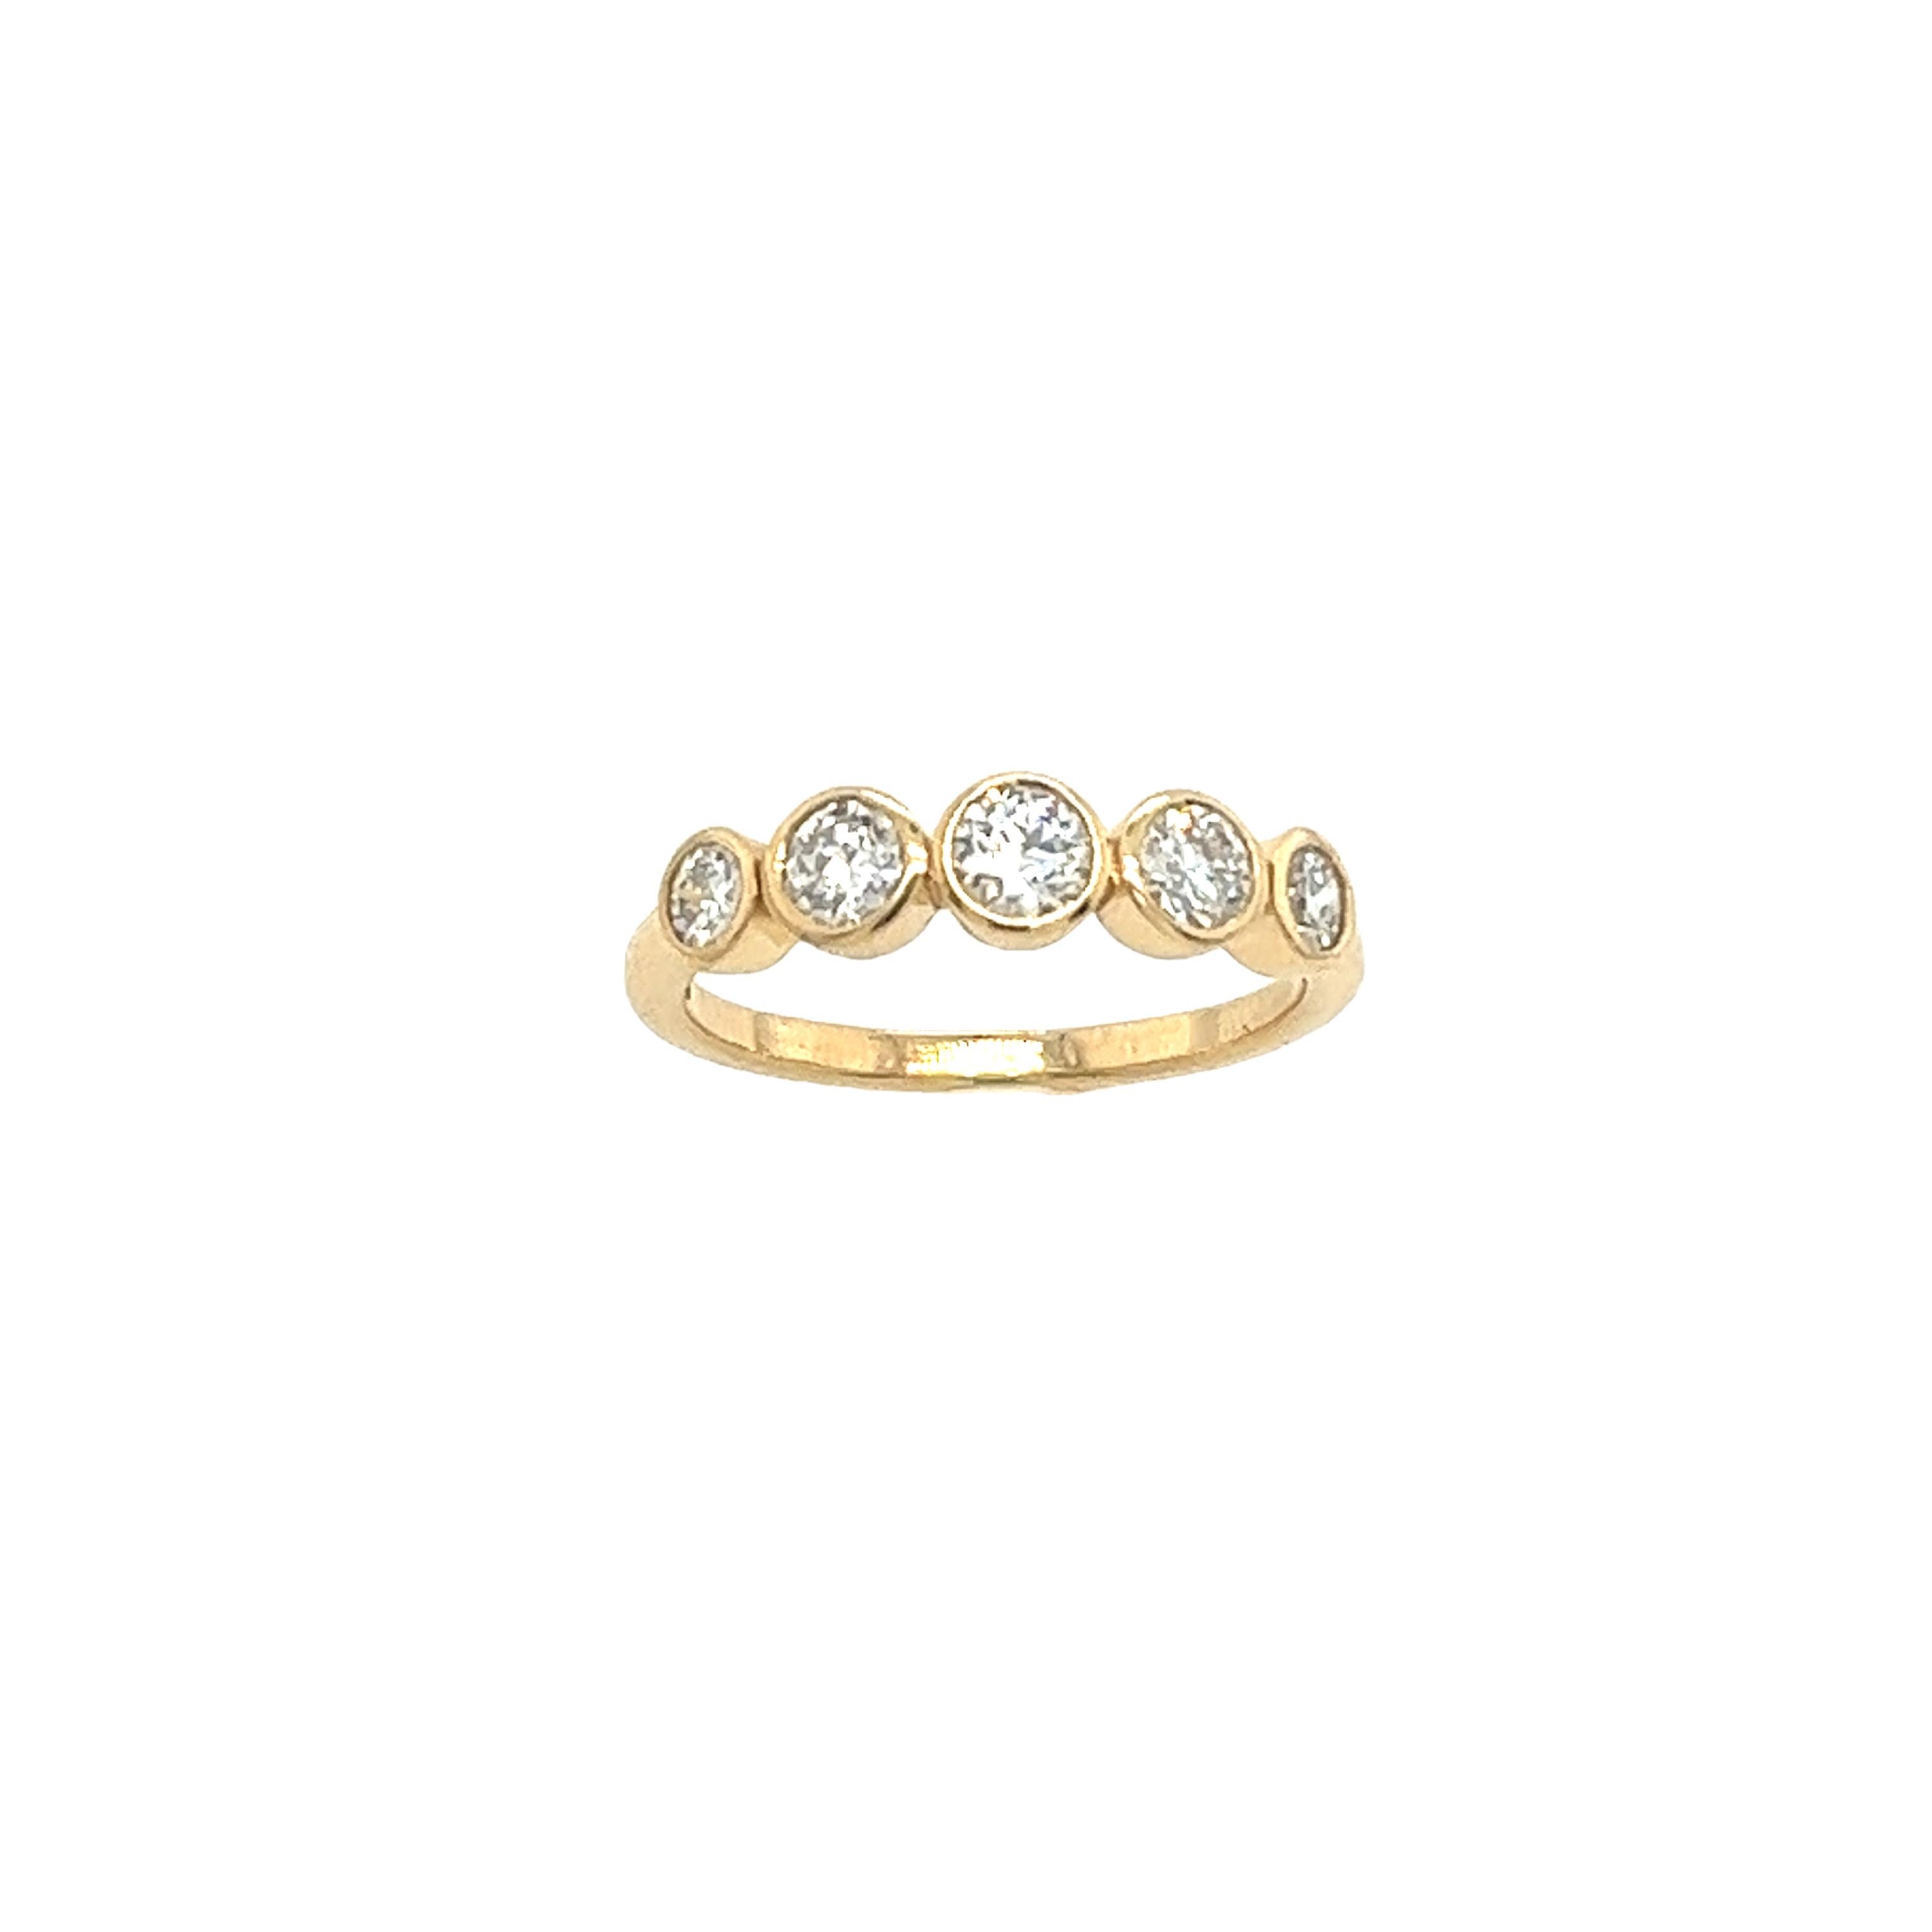 This magnificent diamond 5-stone ring is set with 0.70ct H colour SI1 clarity round brilliant cut diamonds,
Set in 18ct yellow gold setting.
This ring is elegant and beautiful for wedding ring or anniversary ring.
Total Diamond Weight: 0.70ct